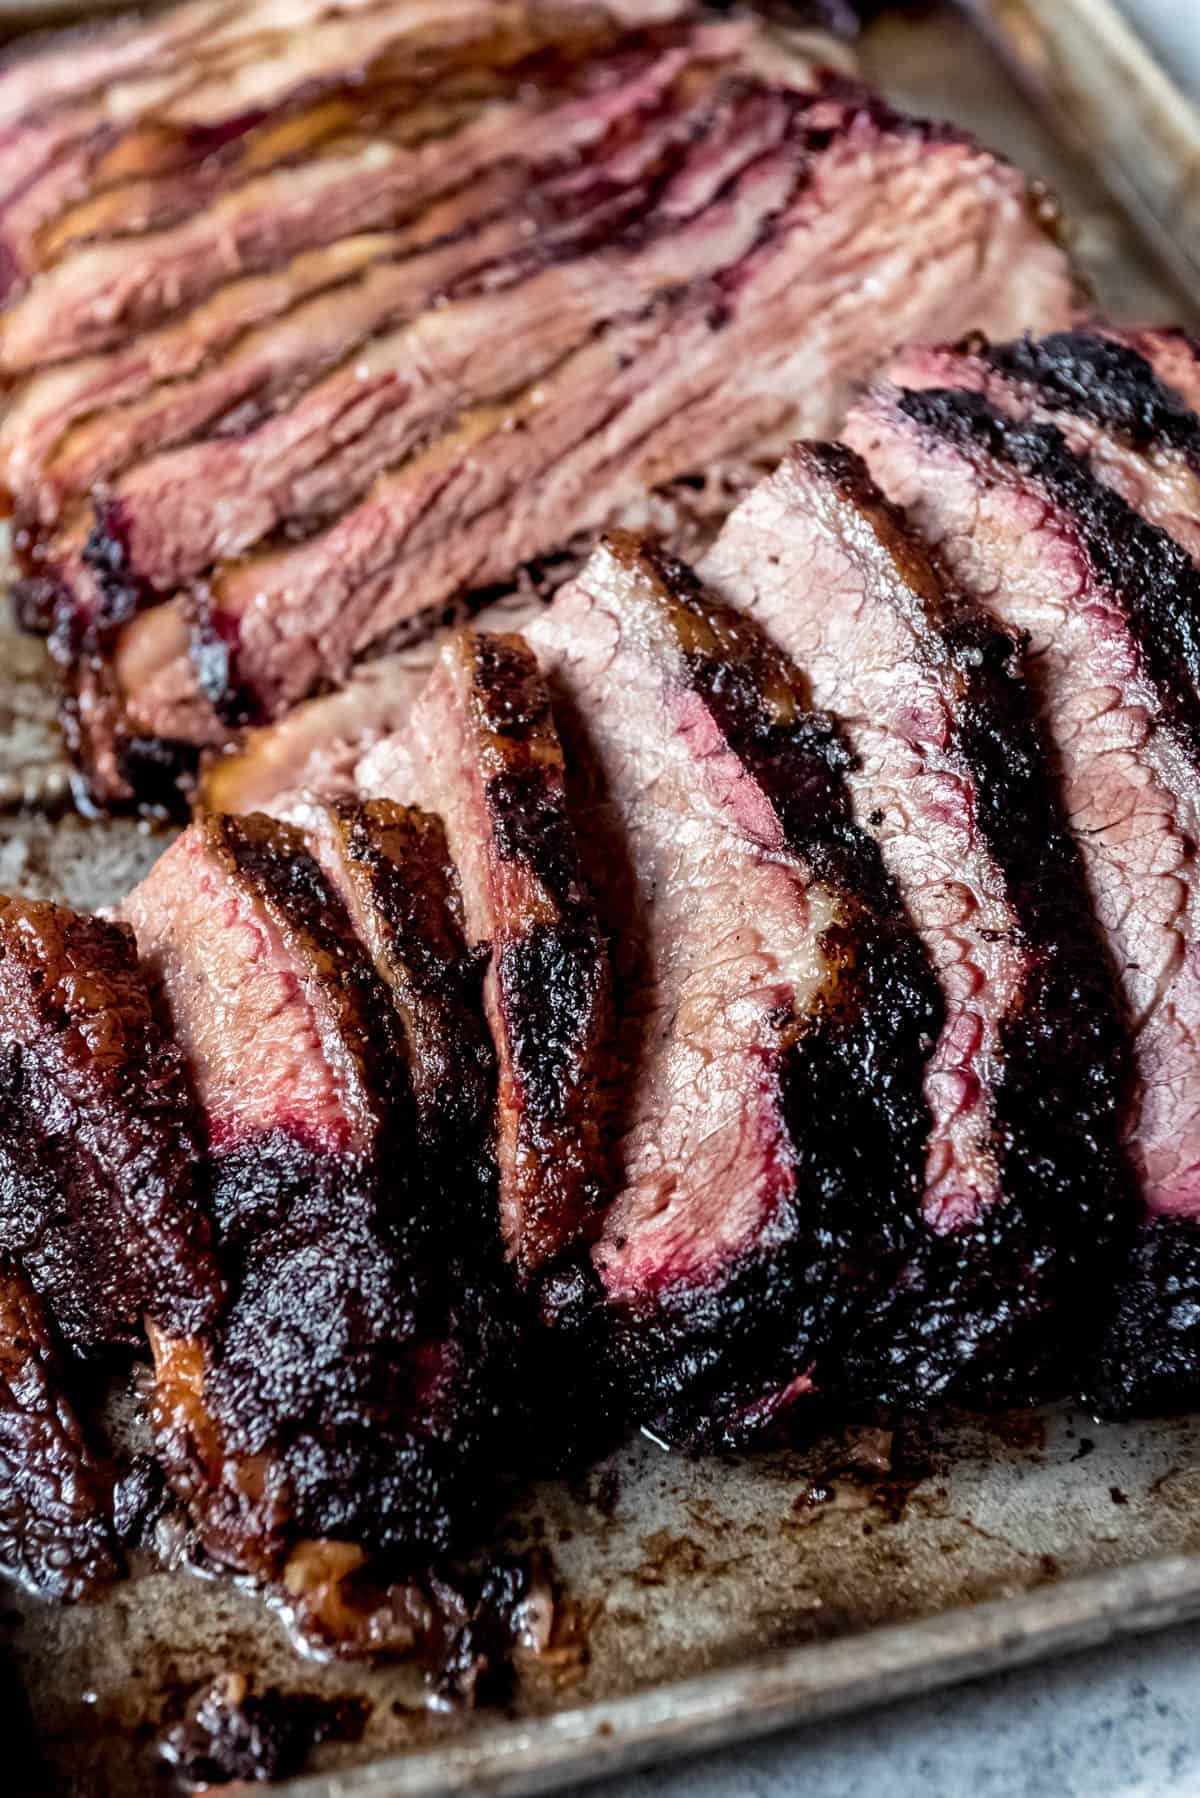 An image of tender, juicy slices of smoked brisket with a smoke ring and dark crusty bark around the edges.